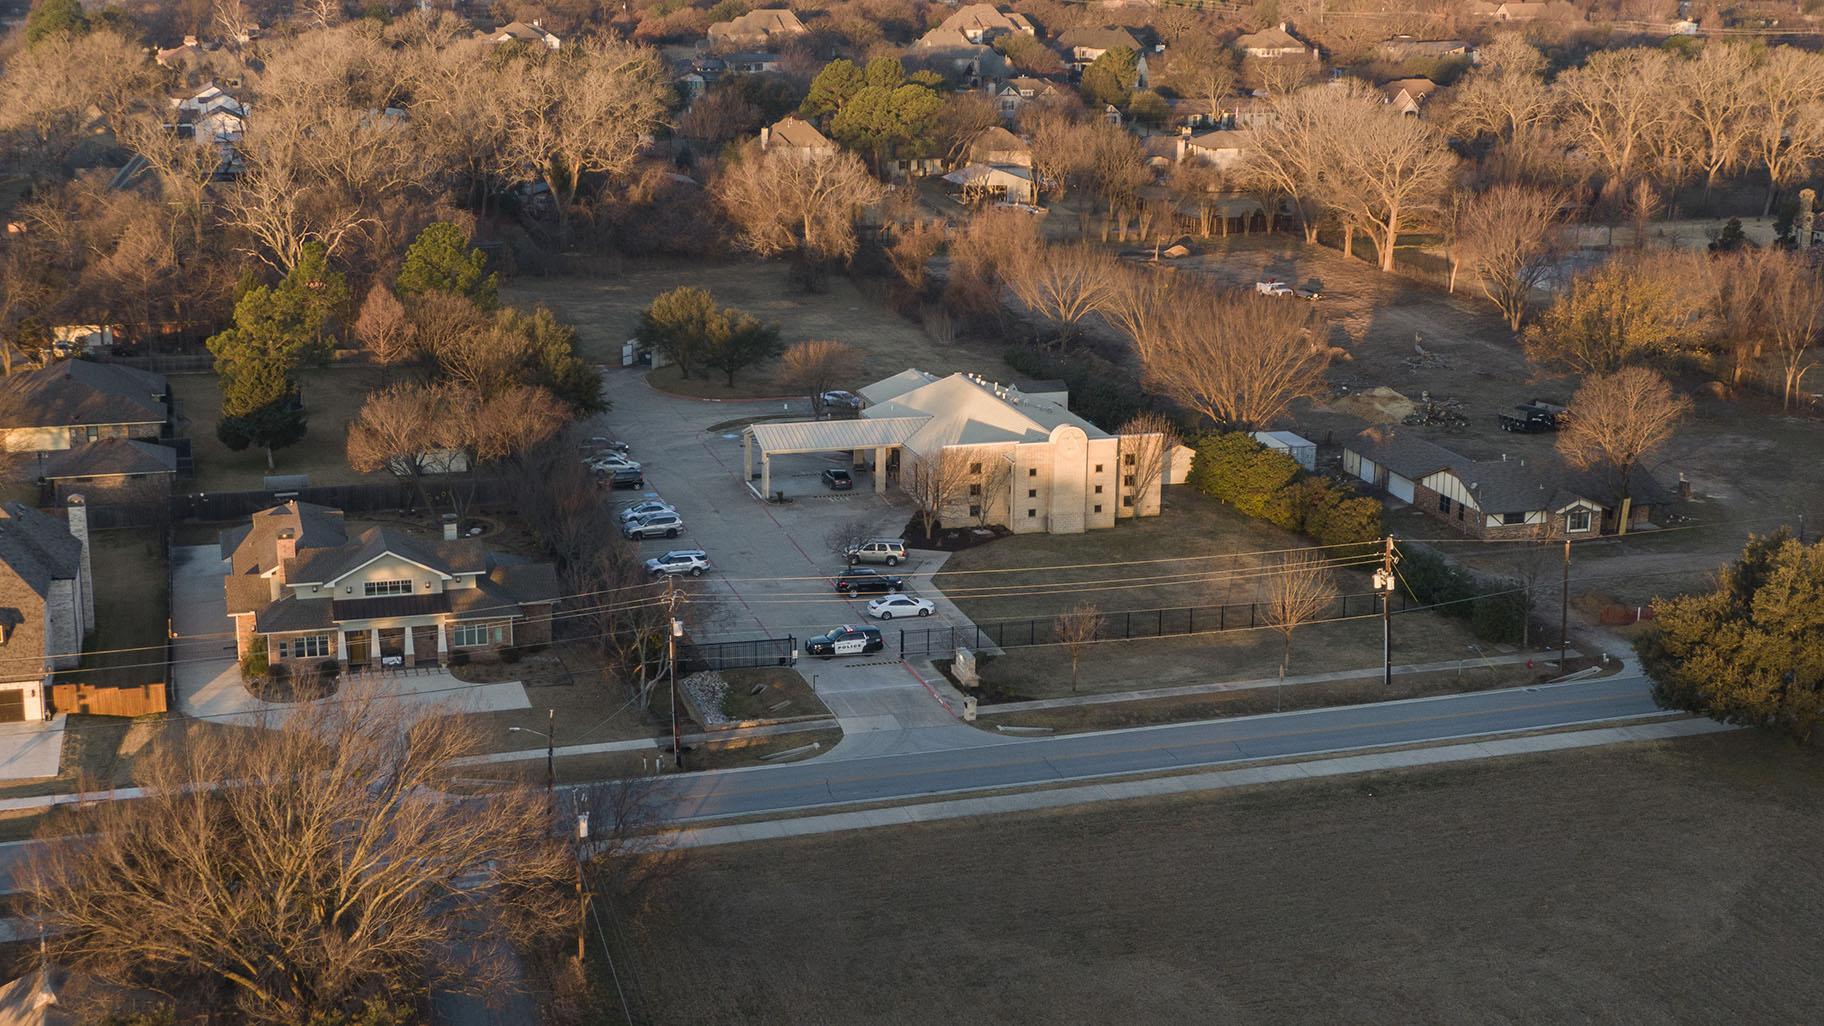 An aerial view of police standing in front of the Congregation Beth Israel synagogue, Sunday, Jan. 16, 2022, in Colleyville, Texas. A man held hostages for more than 10 hours Saturday inside the temple. (AP Photo / Brandon Wade)